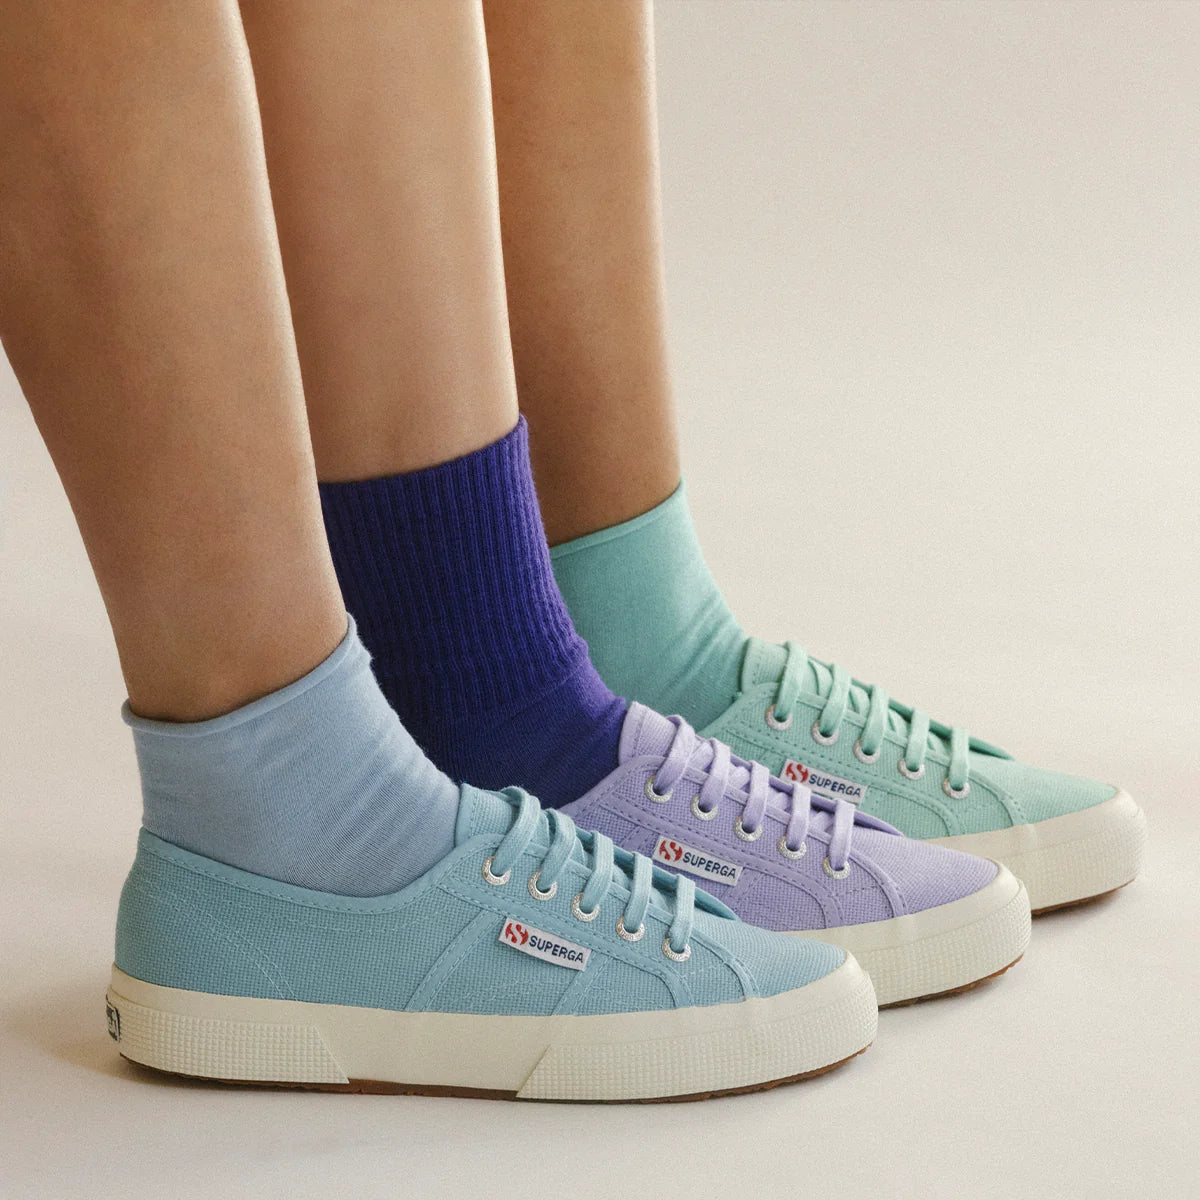 Three people wearing Superga 2750 Cotu Classic Sneakers in blue, purple, and green.